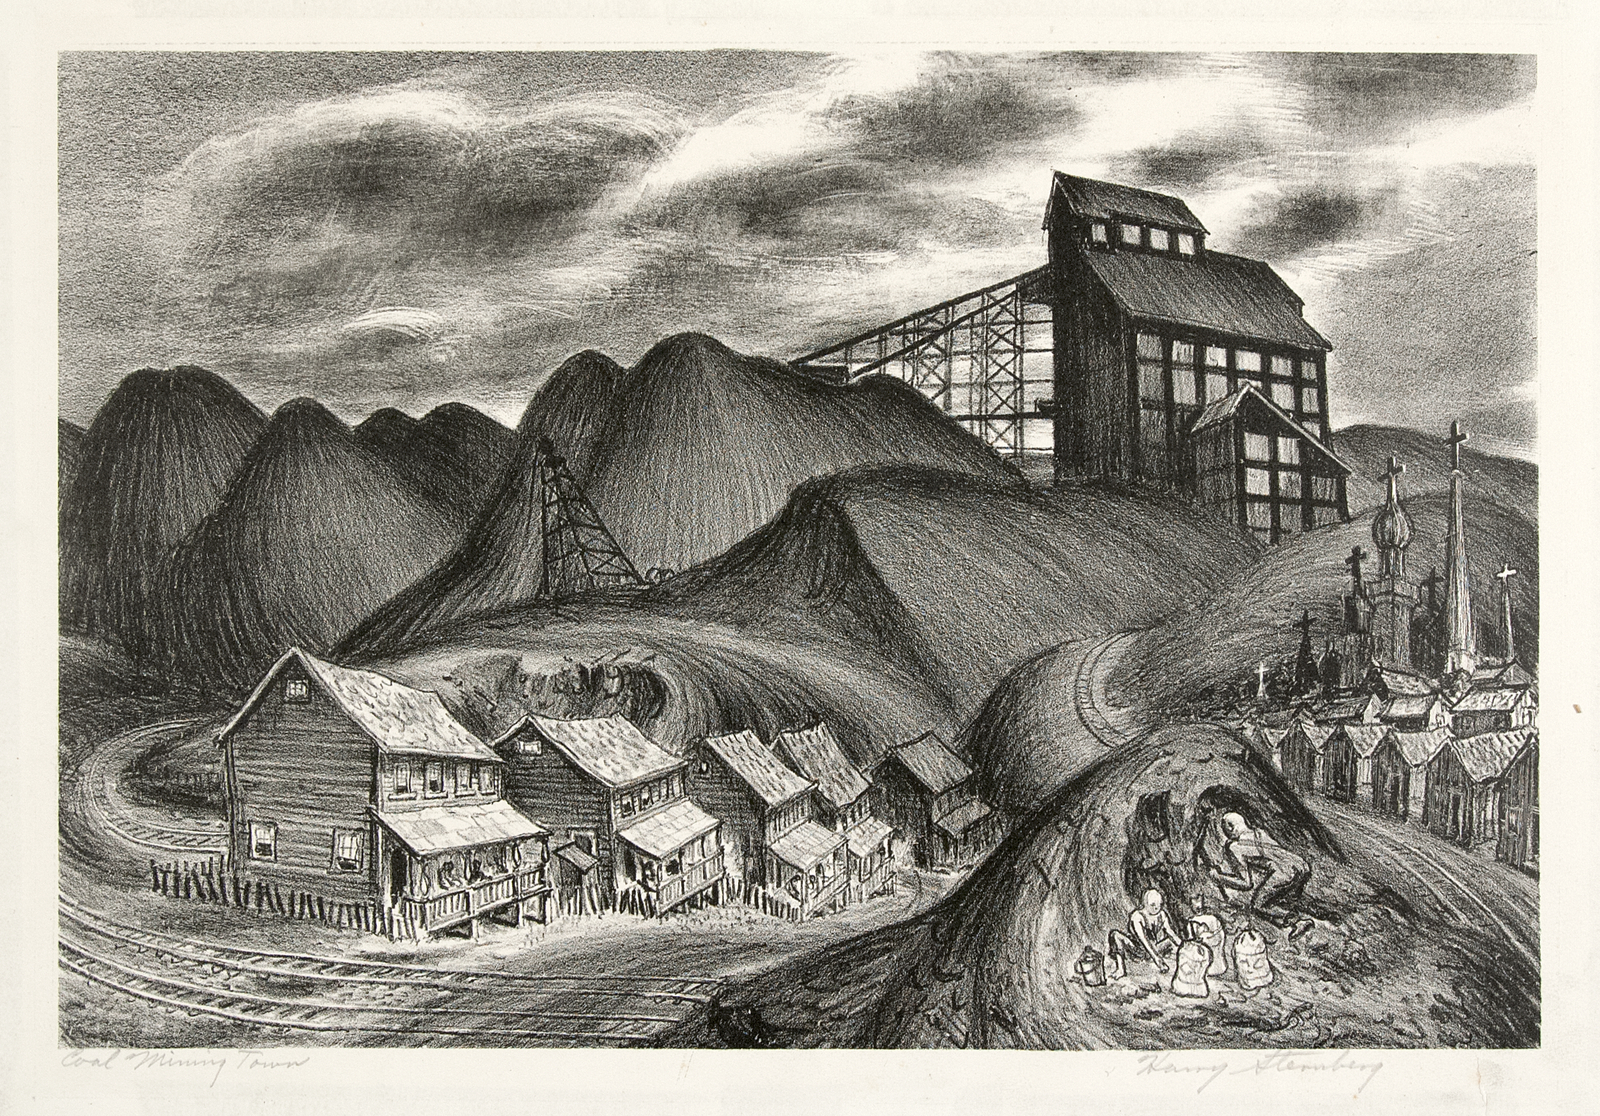 Black and white artistic print of a landscape with a row of houses at the bottom of a hill, with a larger house on the top of a hill behind.